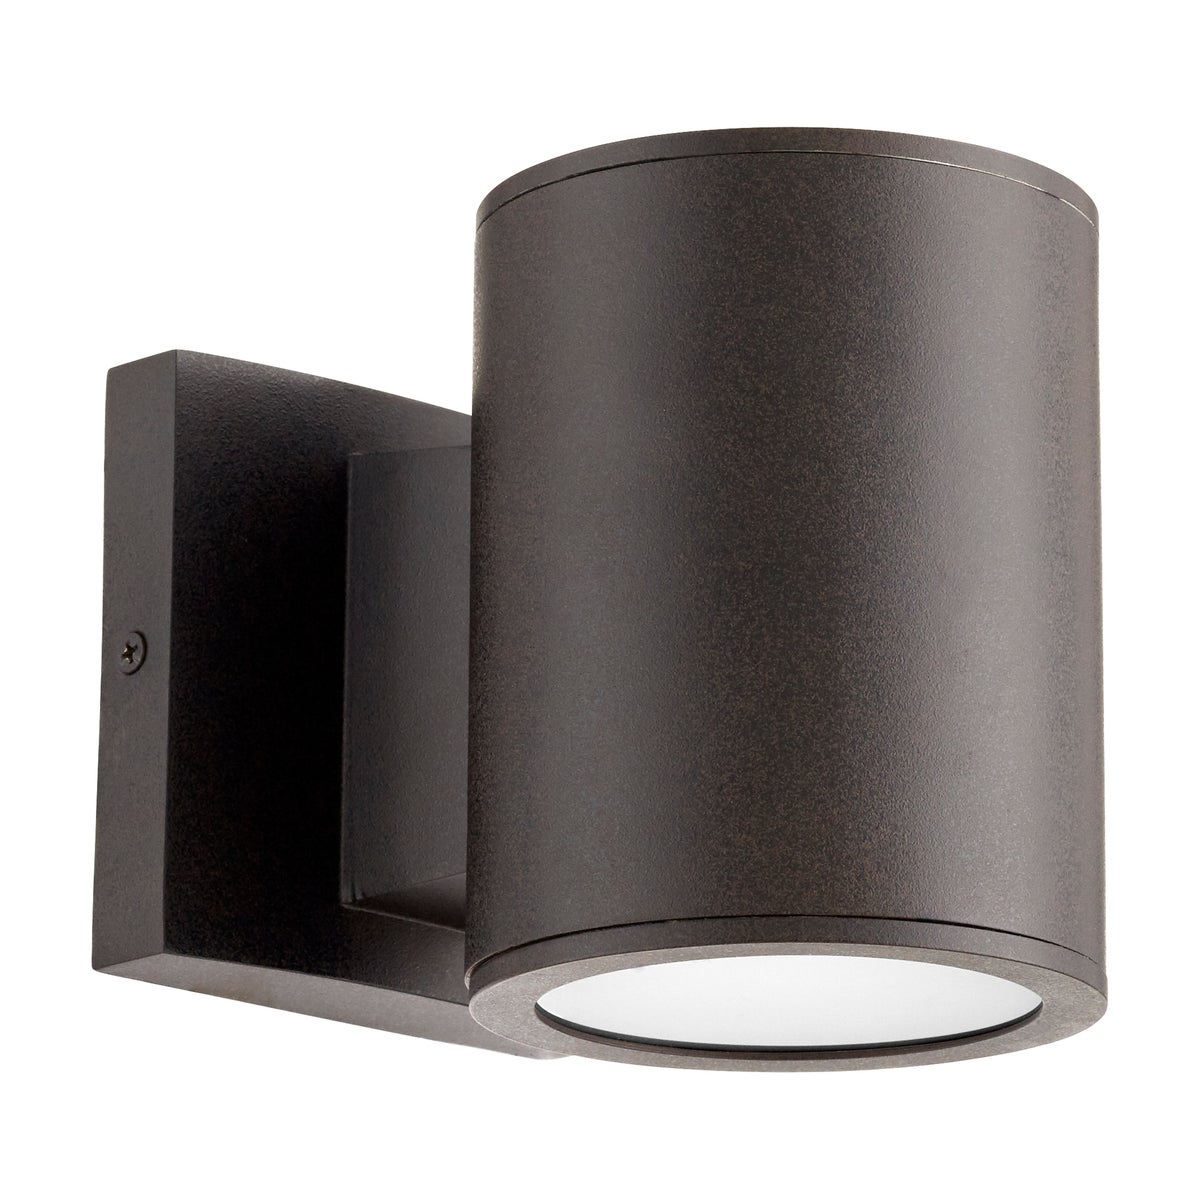 Cylinder Outdoor Wall Light with Frosted Glass Shade, LED, 6W, 3000K, UL Listed, Wet Location, Noir/Oiled Bronze Finish. Sleek and futuristic design for your outdoor ensemble.